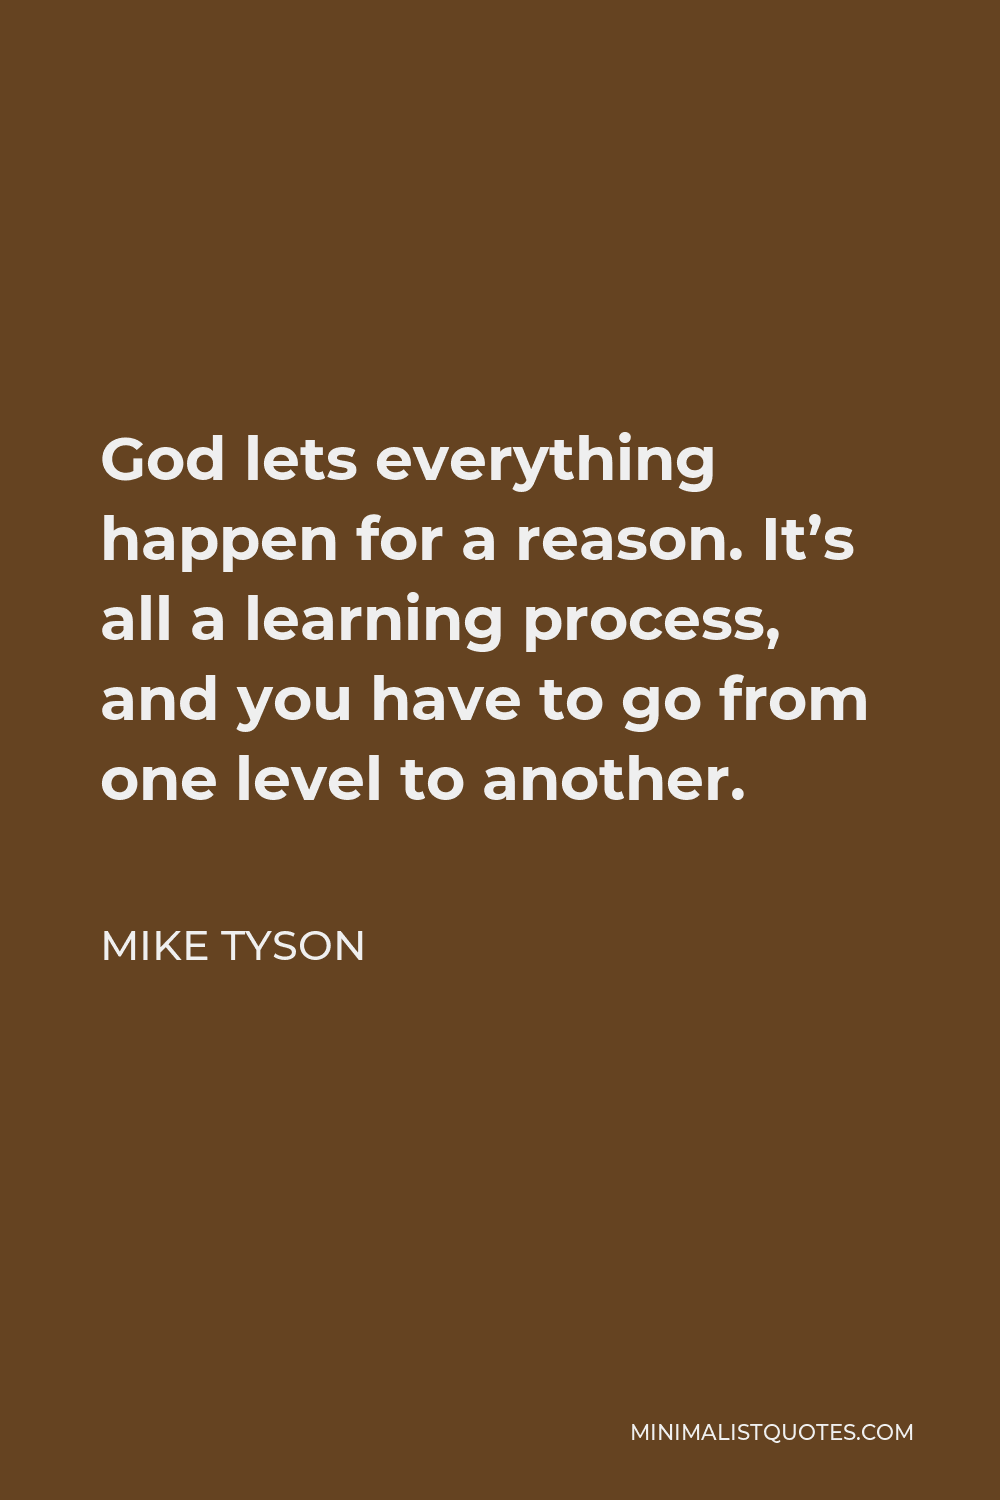 Mike Tyson Quote - God lets everything happen for a reason. It’s all a learning process, and you have to go from one level to another.